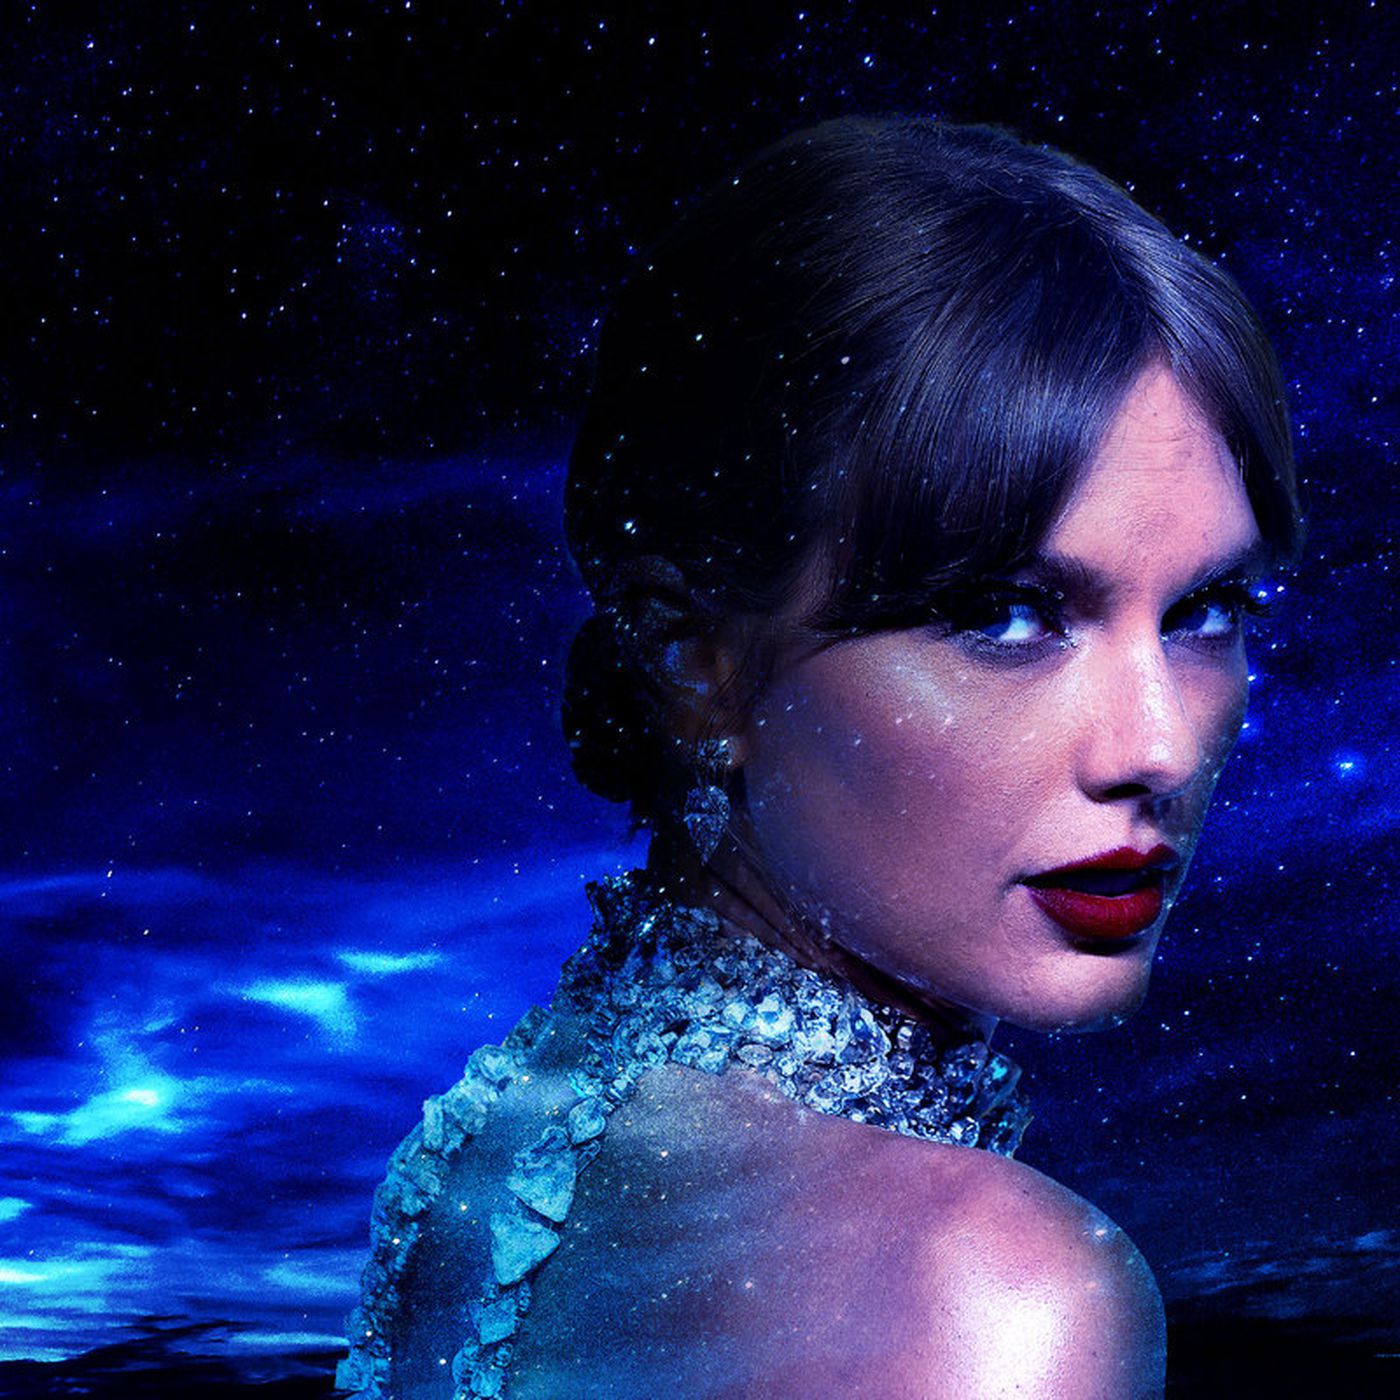 Questions About Taylor Swift's Upcoming Album, 'Midnights'